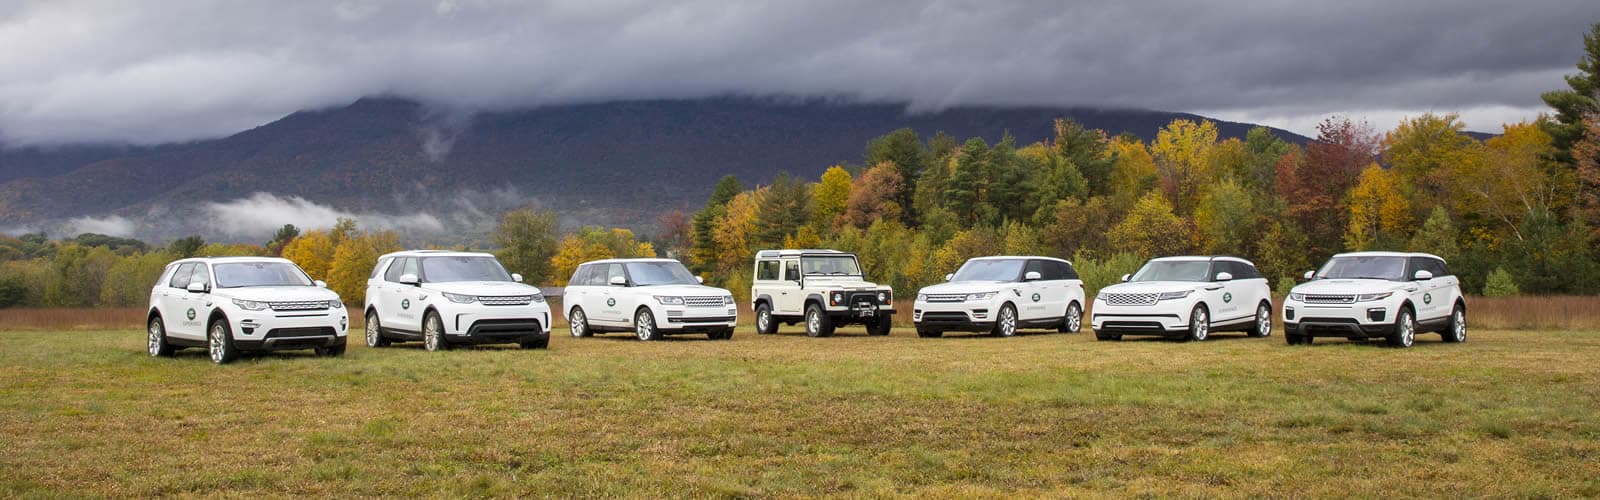 Land Rover Experience - Panorama of Vehicles and Mountains